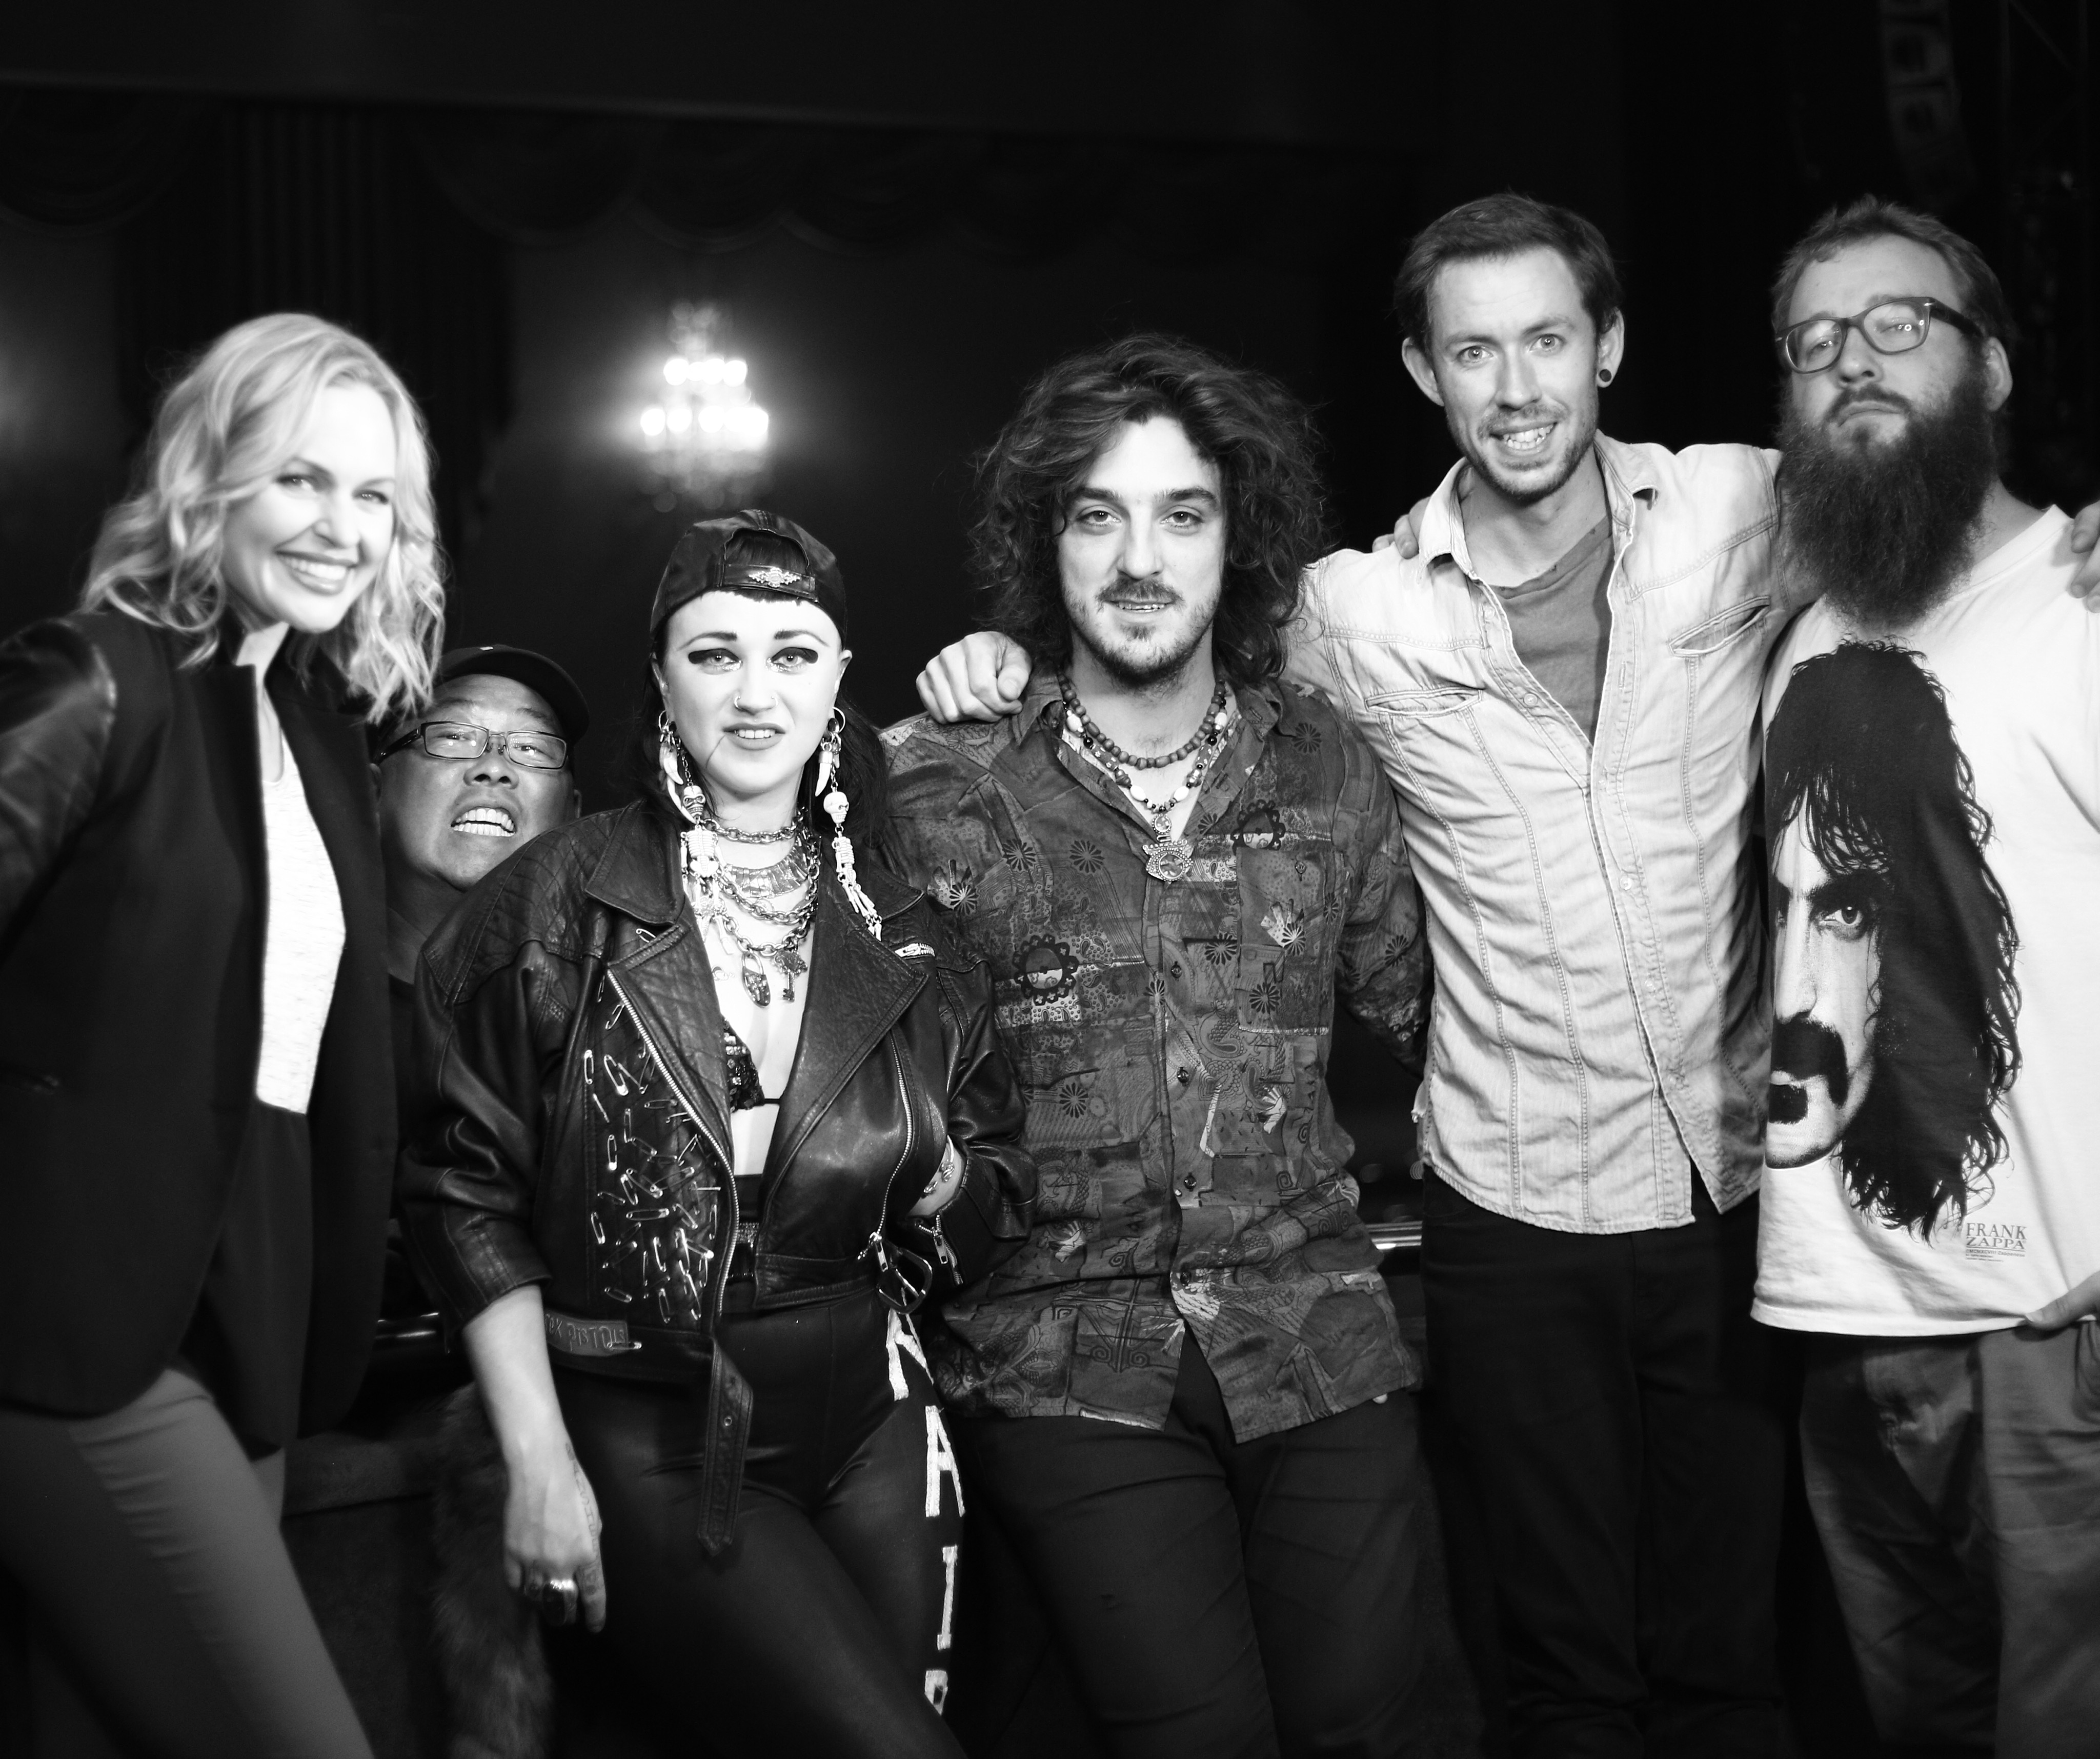 With GRAMMY-nominated Hiatus Kaiyote for CBS Music Minute and photo bomb by our DP Glenn Shimada